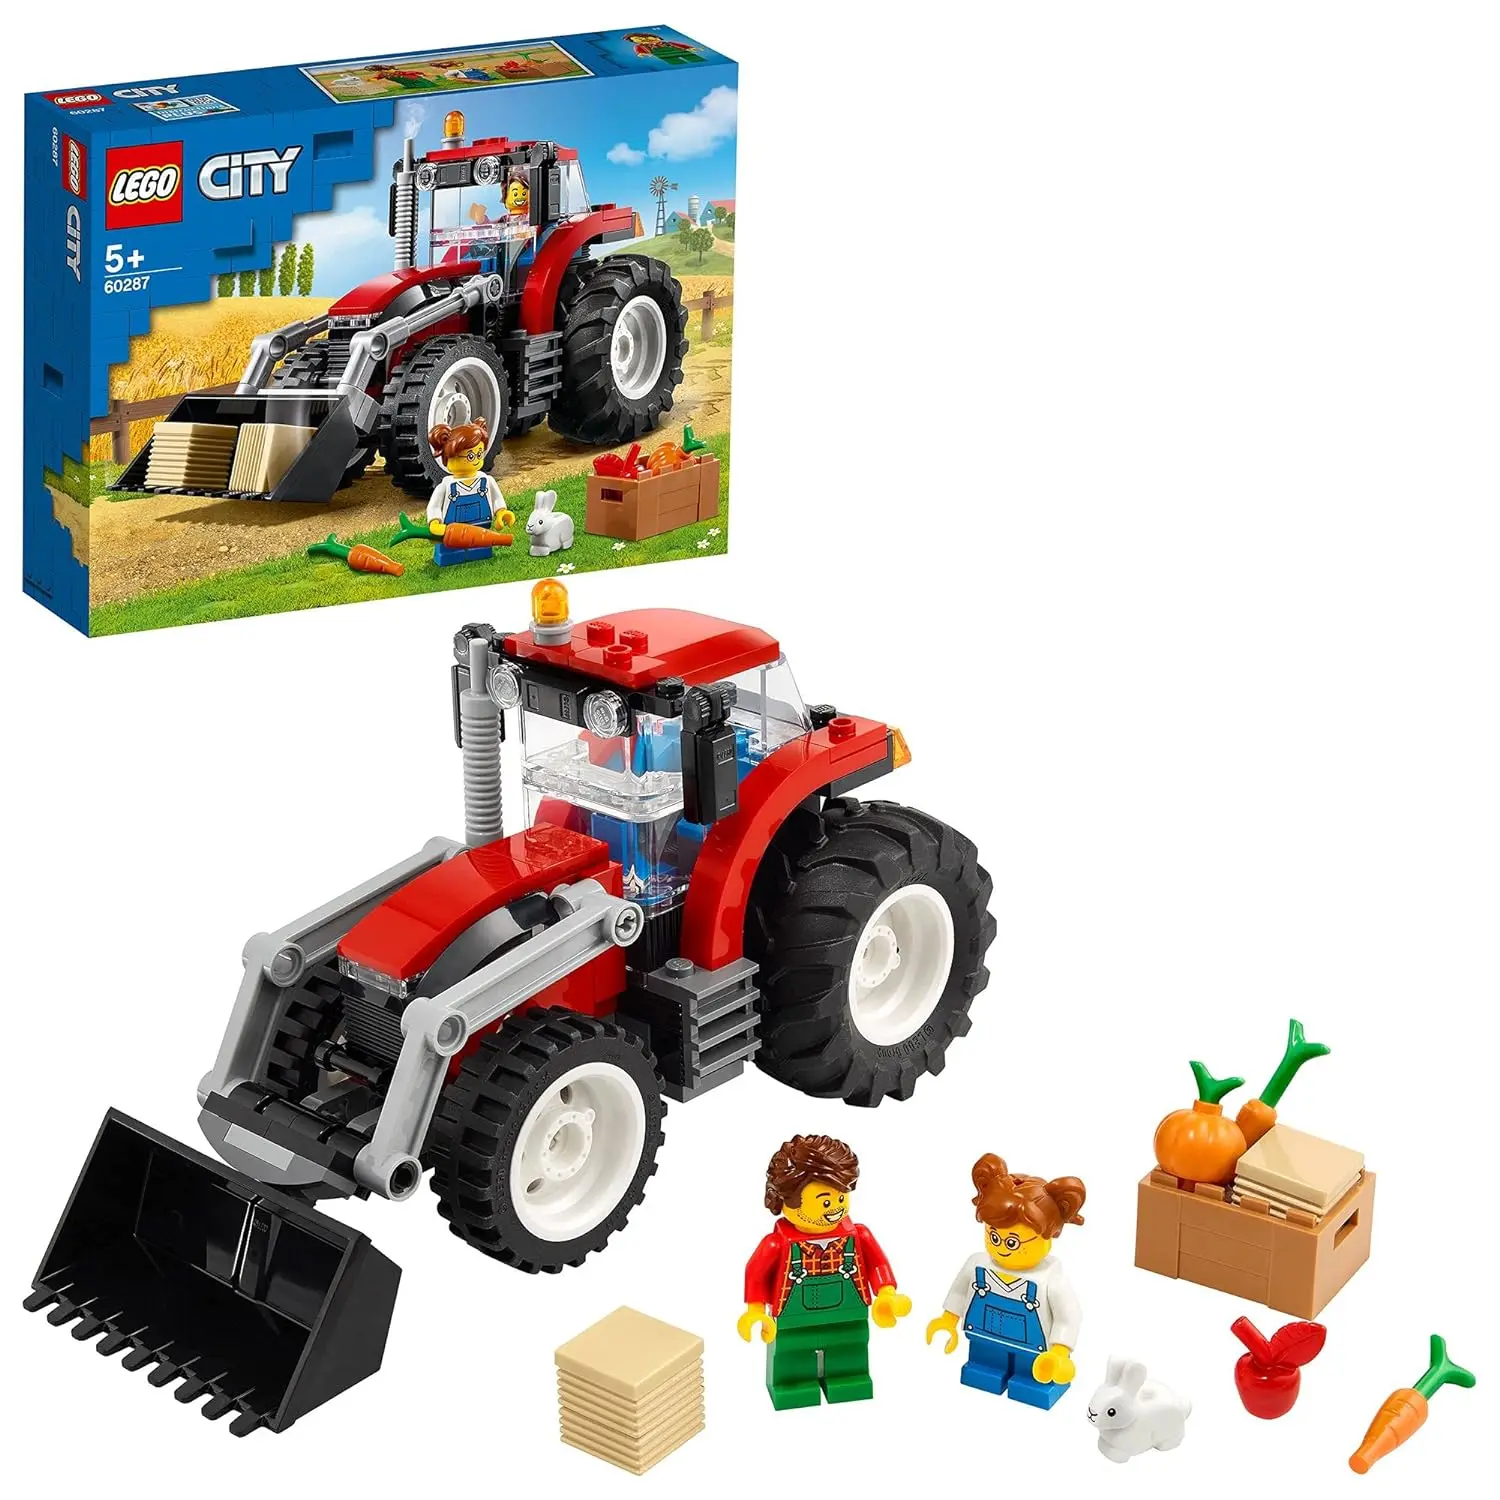 Lego City Tractor 60287 Building Kit